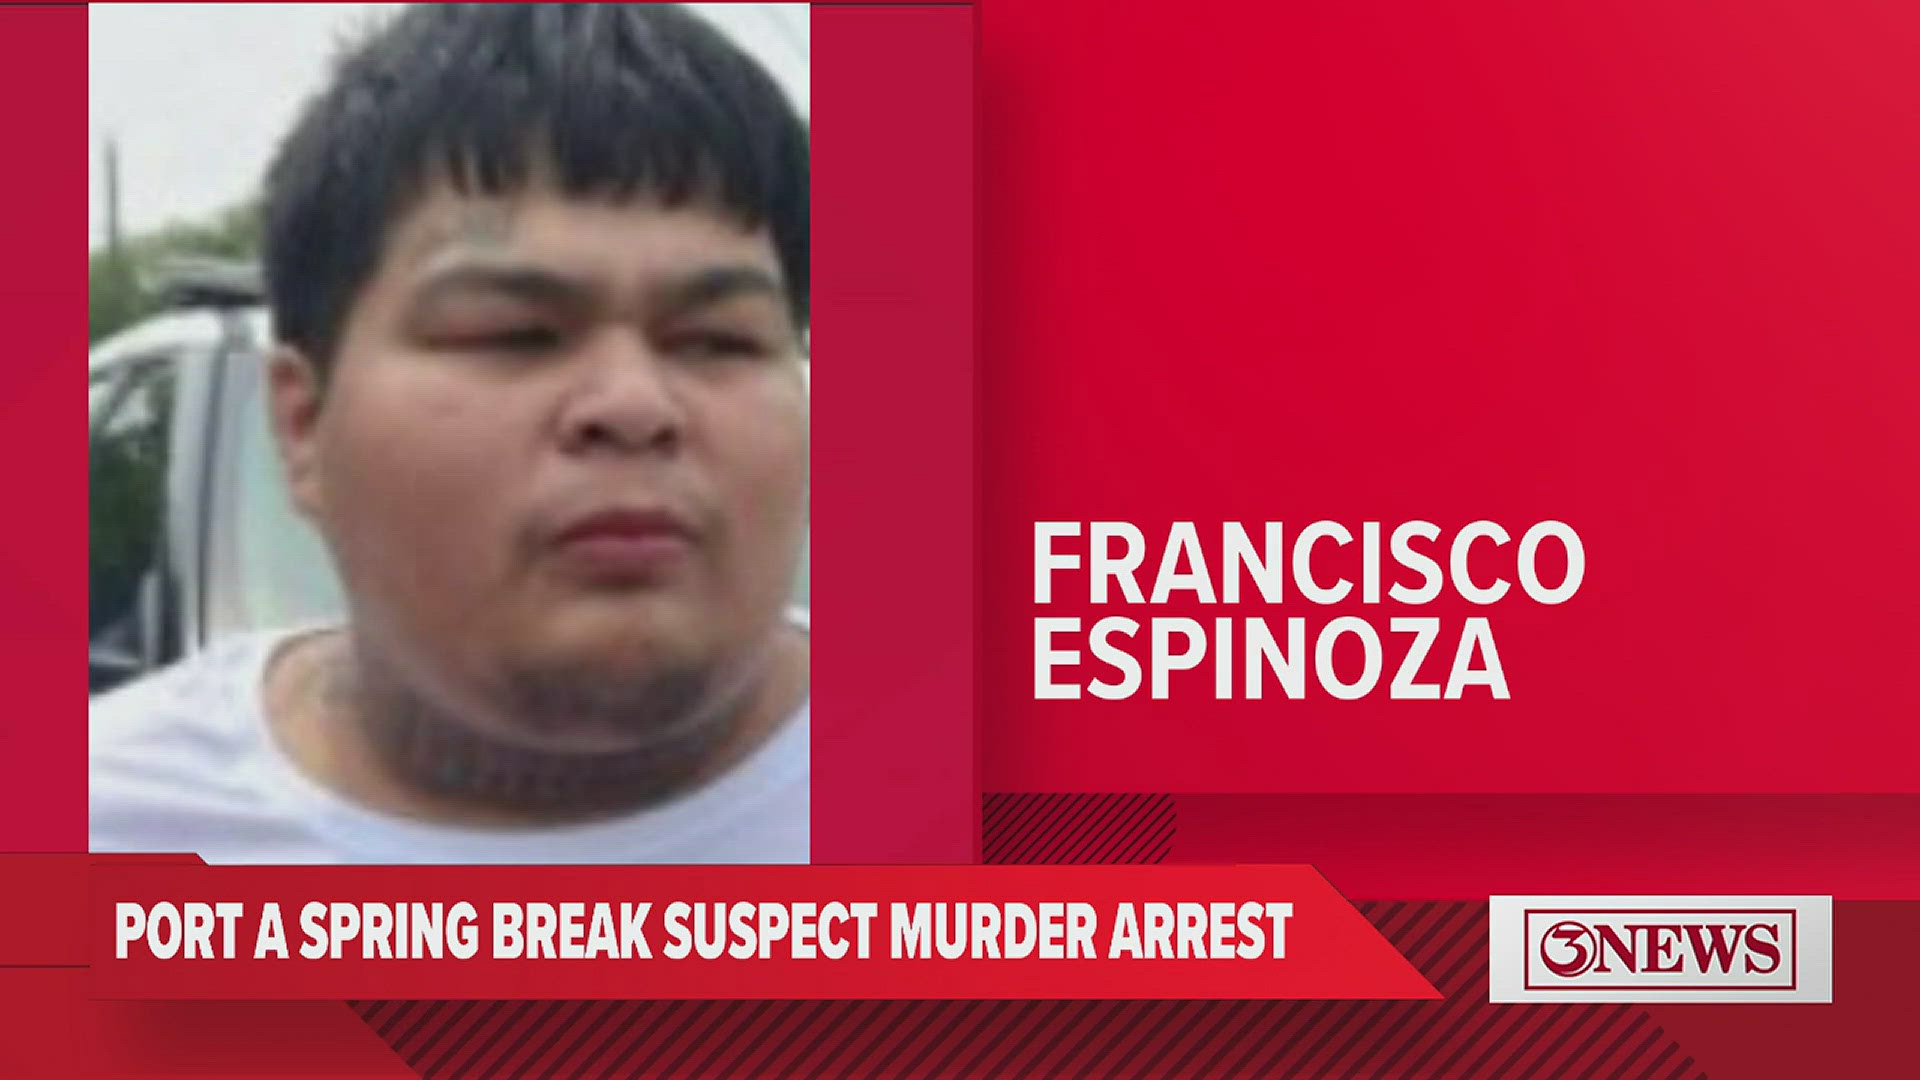 Francisco Espinoza, 19, was arrested before 2 p.m. Thursday in Taft.